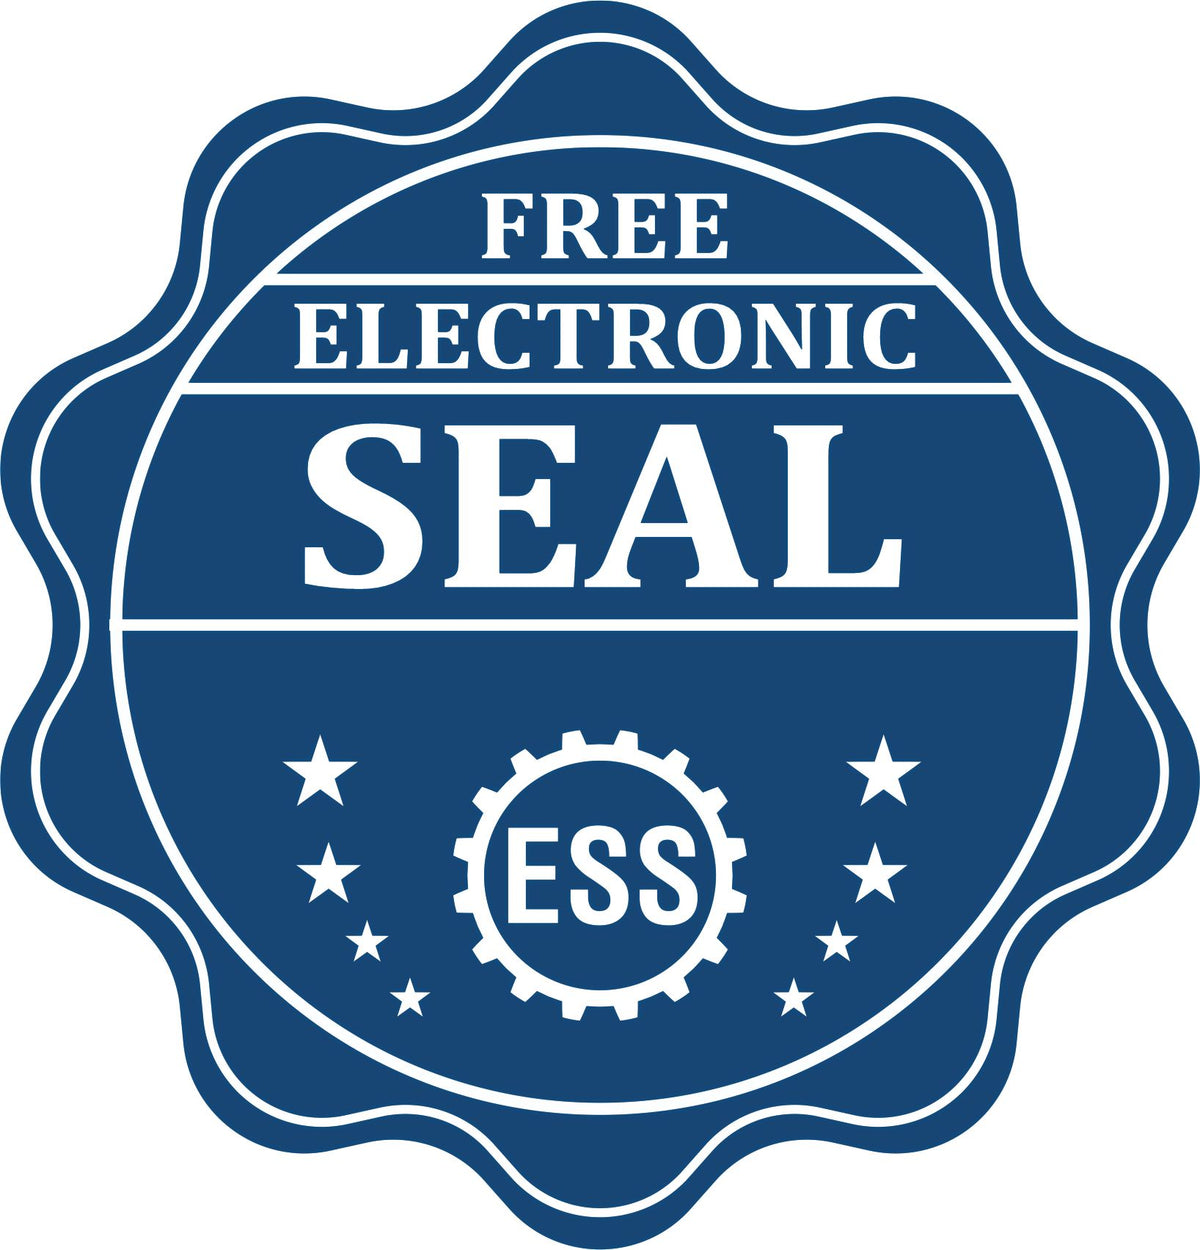 A badge showing a free electronic seal for the Soft Pocket West Virginia Landscape Architect Embosser with stars and the ESS gear on the emblem.